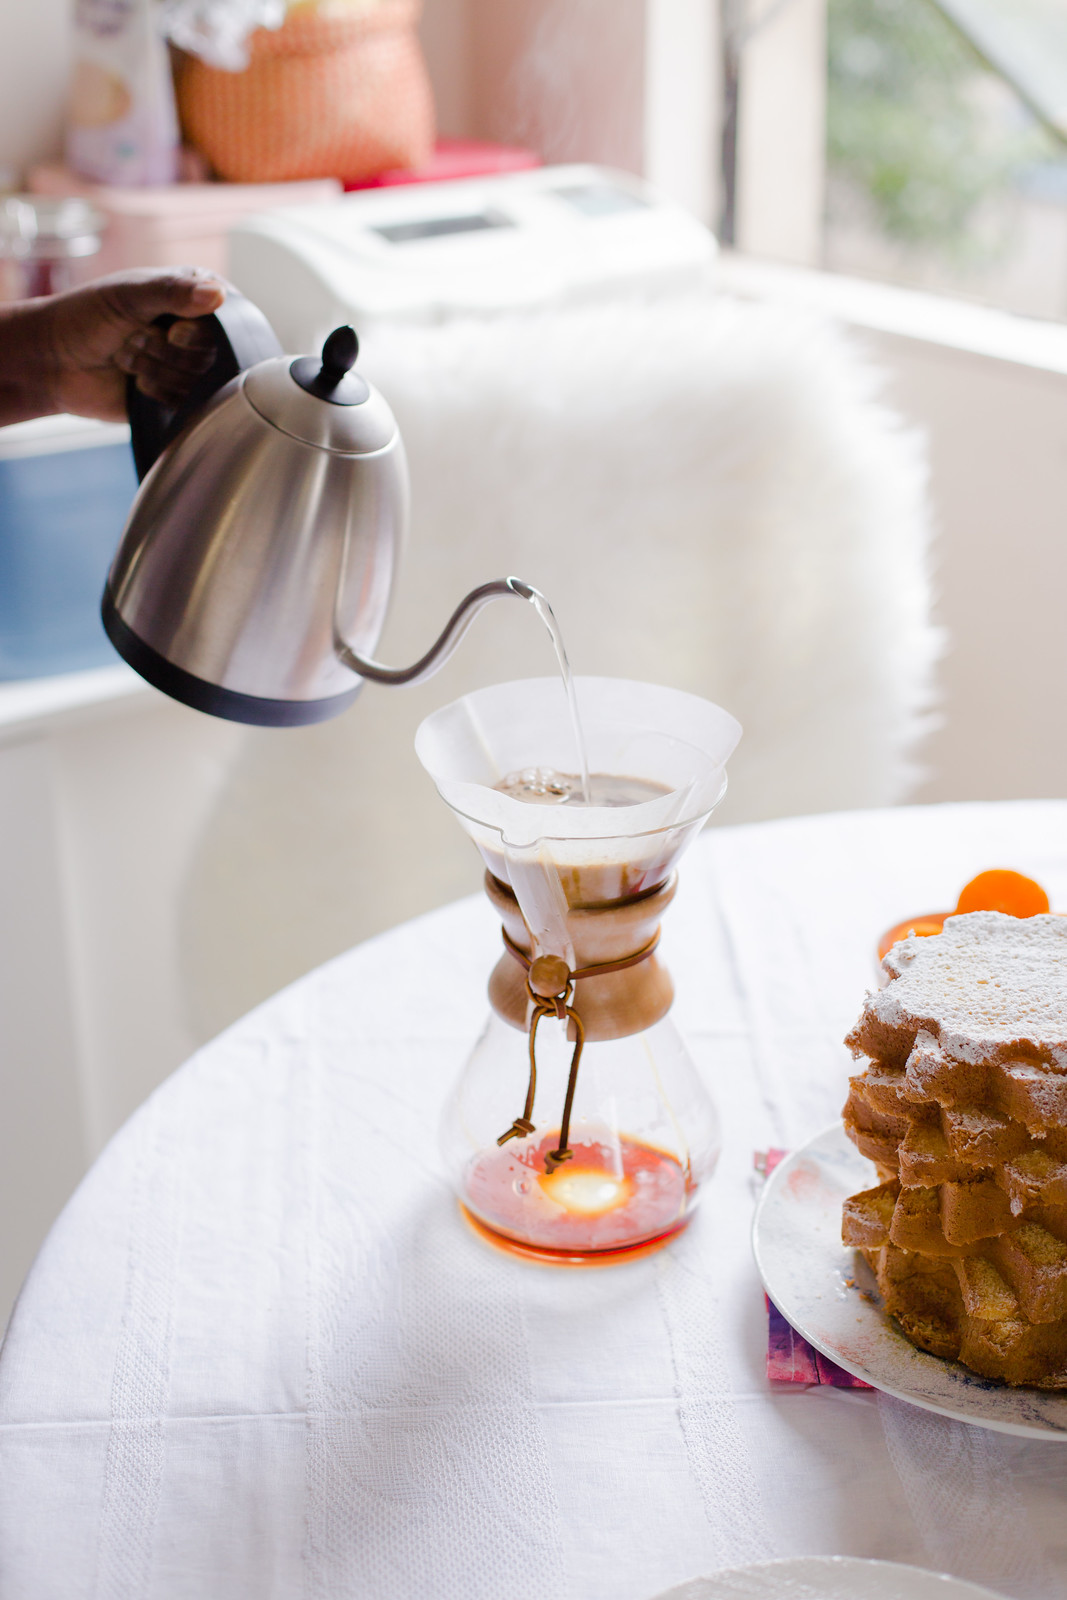 Brewing with the Chemex Coffee Maker